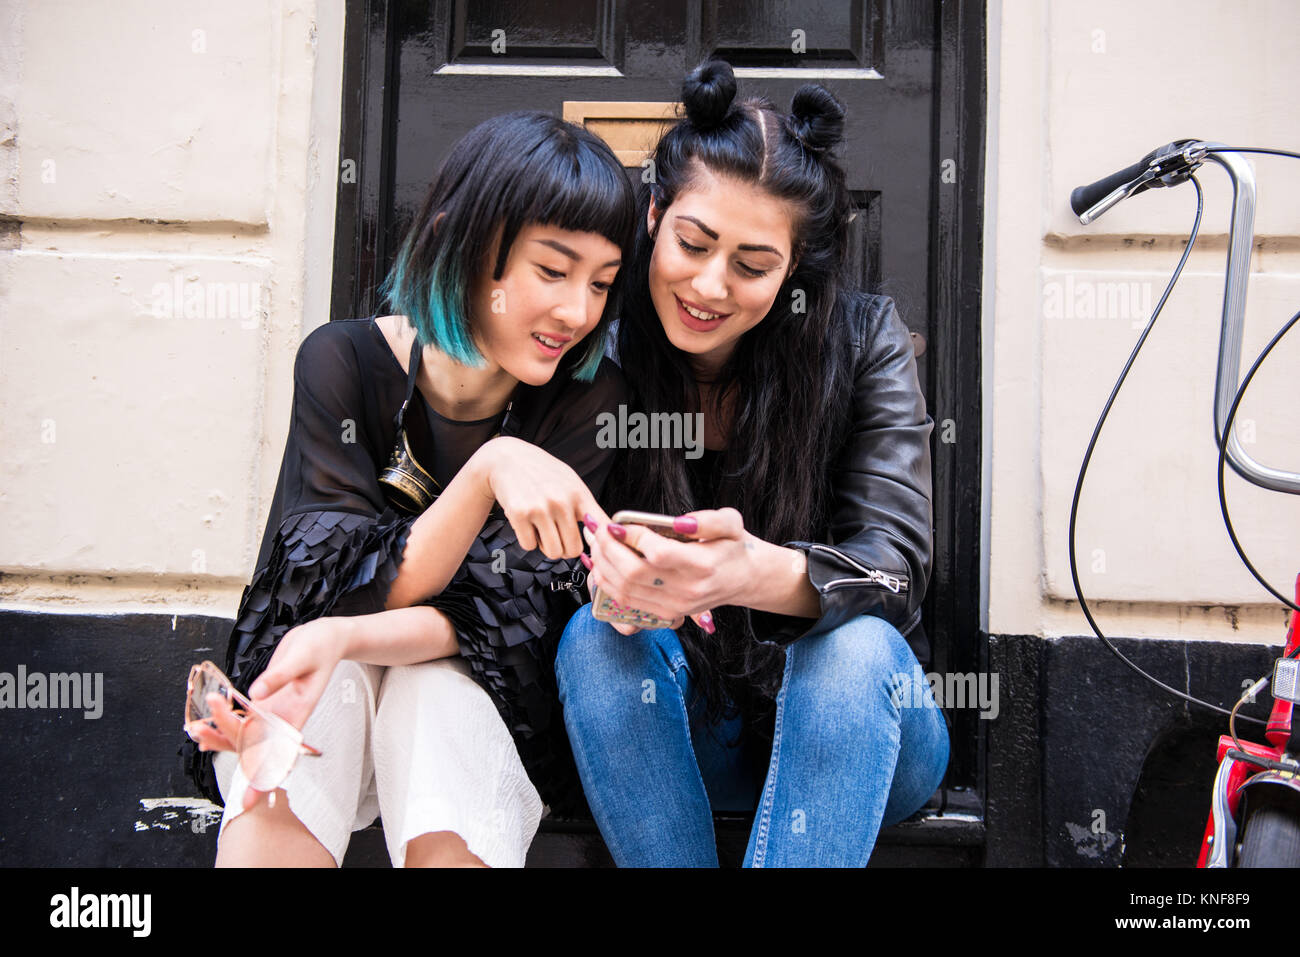 Two young stylish female friends sitting doorstep looking at smartphone Stock Photo